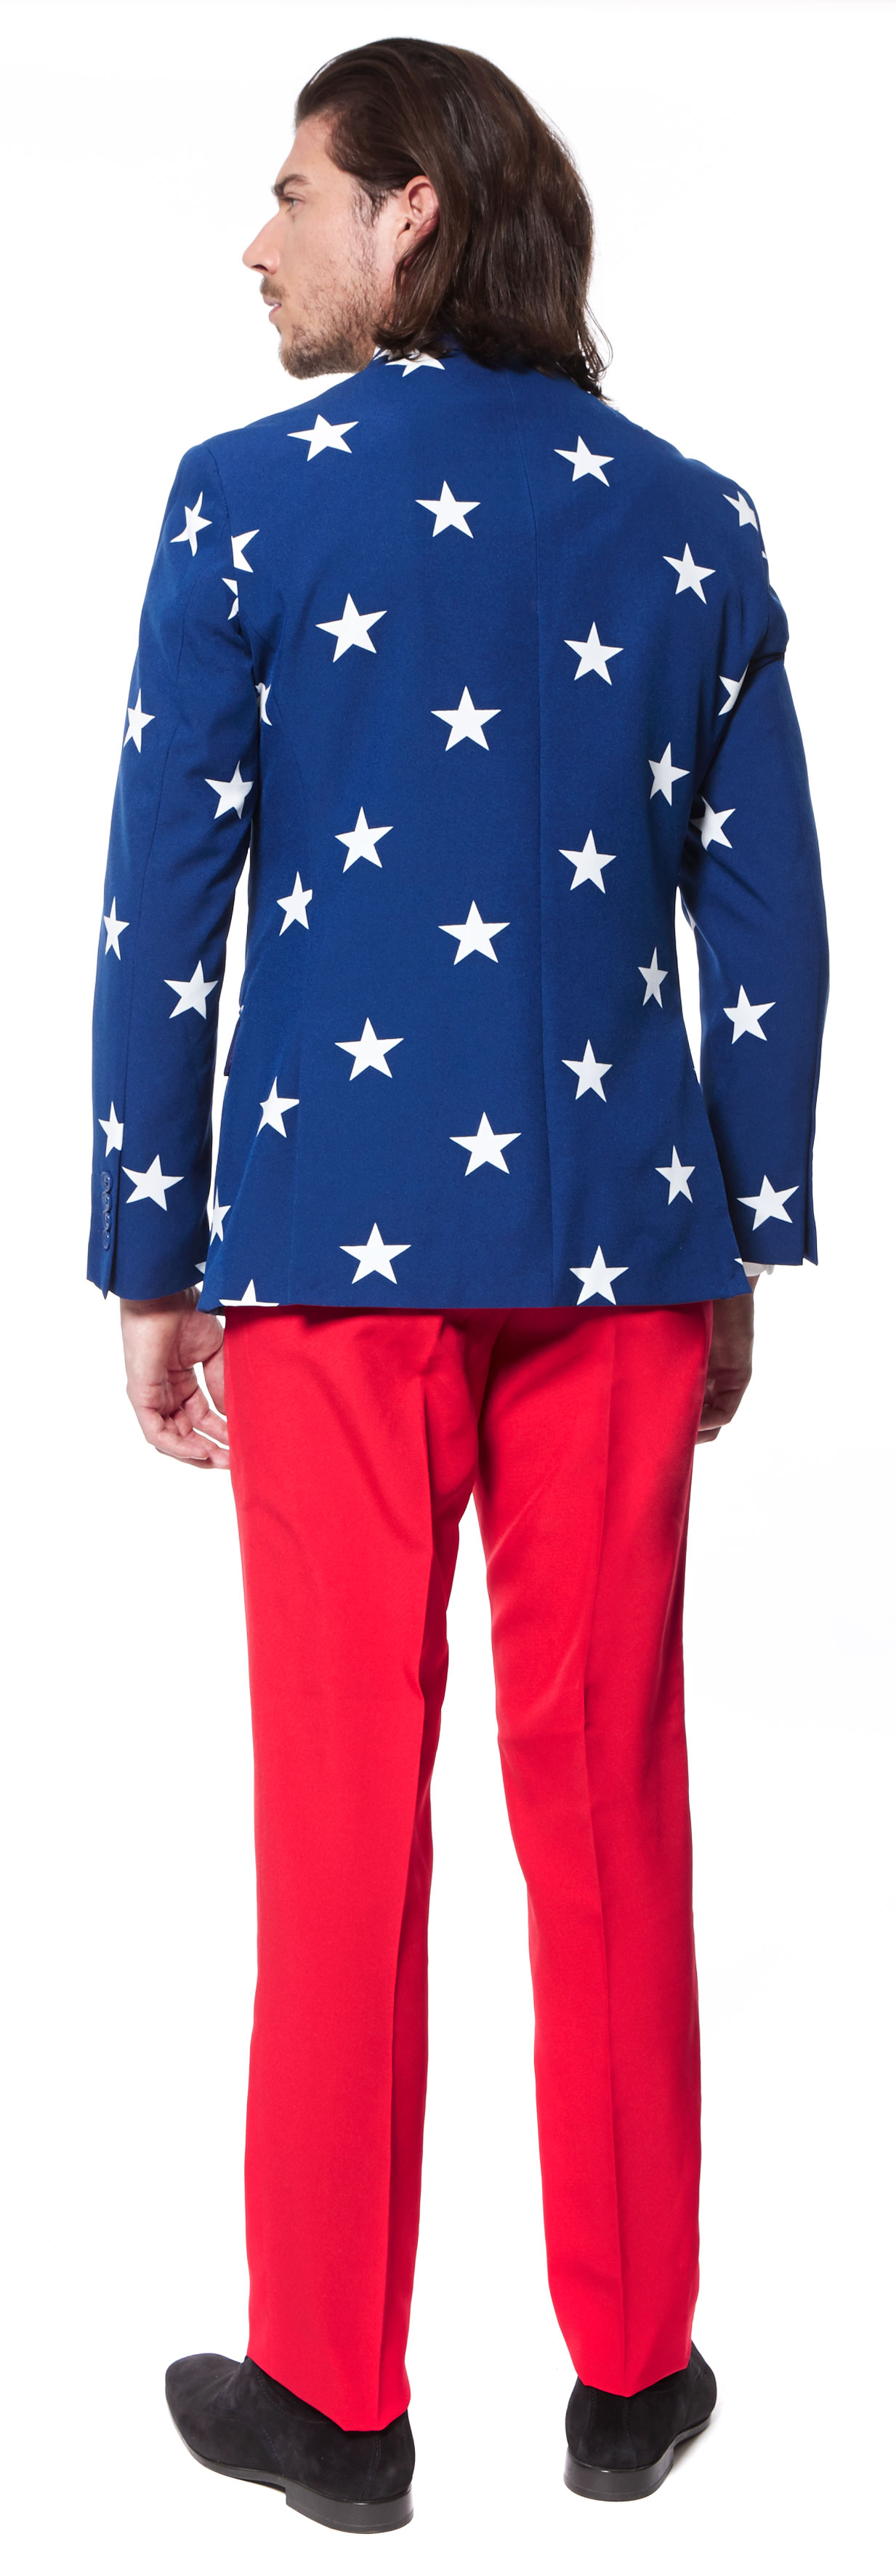 OppoSuits Men's Stars and Stripes Americana Suit - image 2 of 3